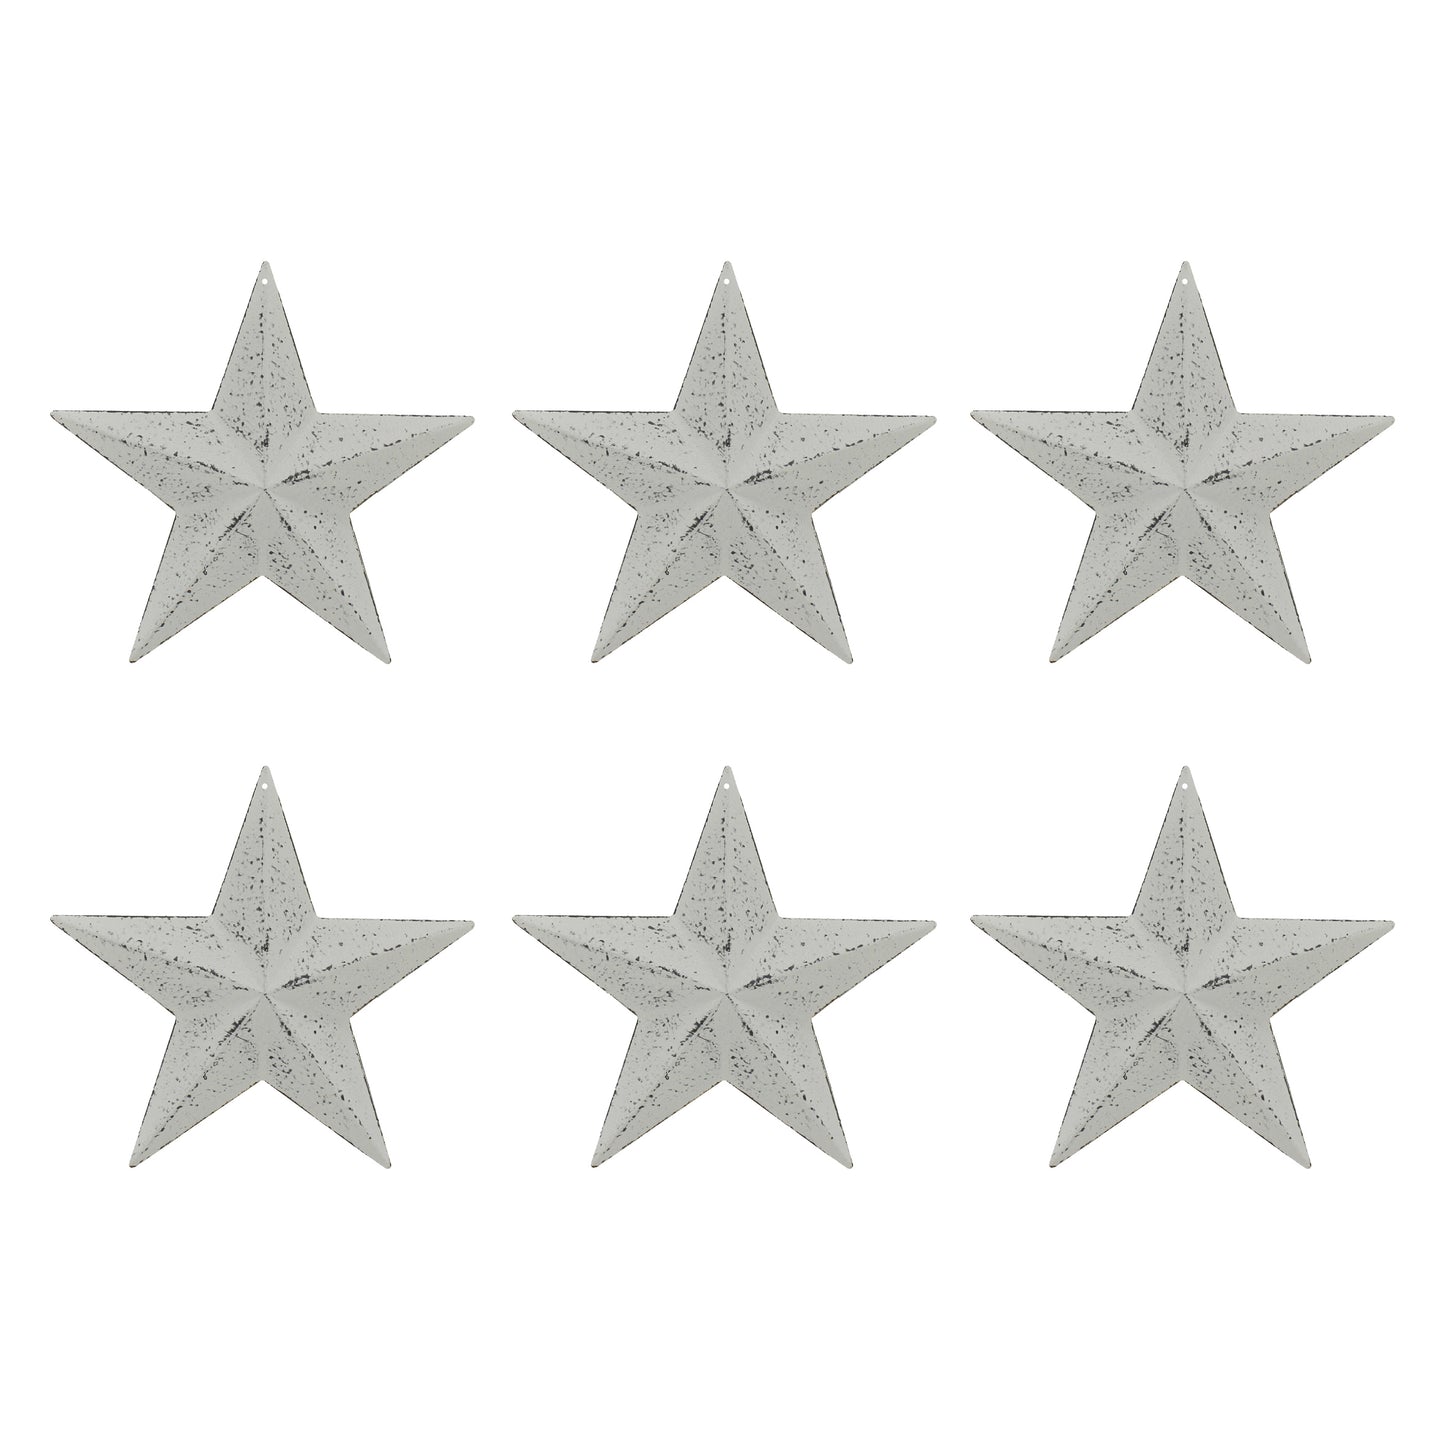 CVHOMEDECO. Country Rustic Antique Vintage Gifts Metal Barn Star Wall/Door Decor, 5.5 Inch, Set of 6. (Whitewash)